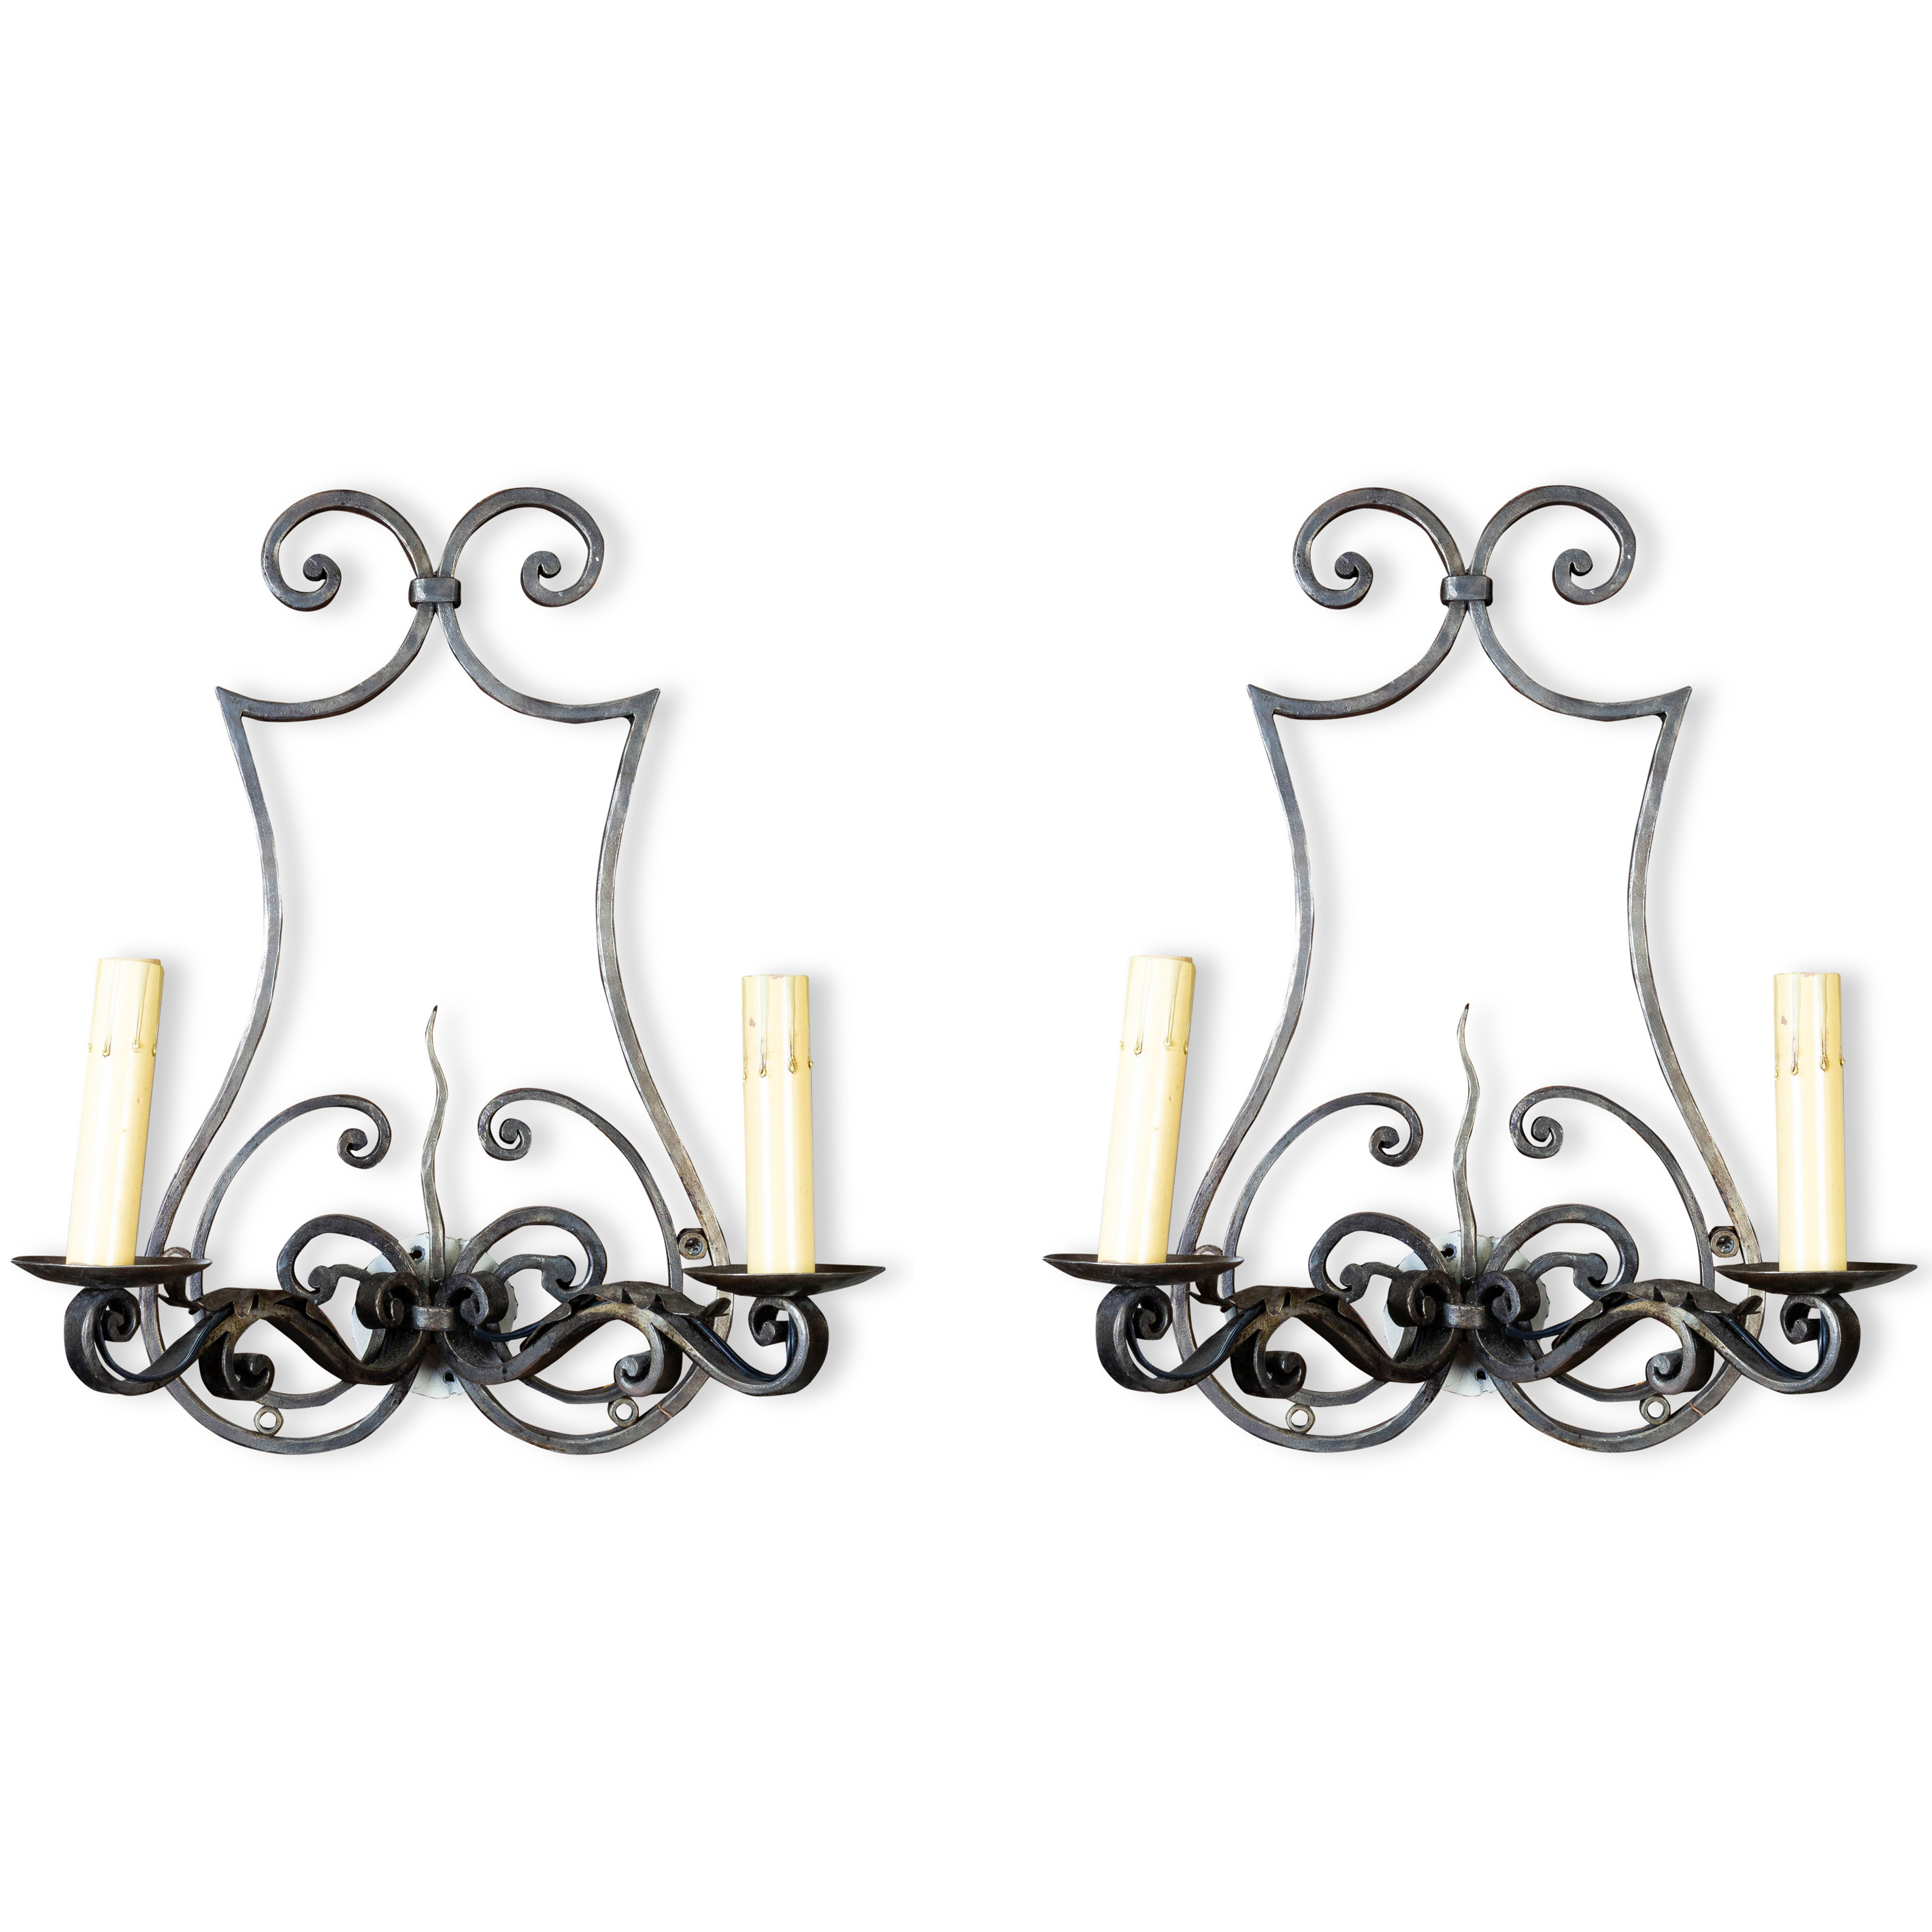 PAIR OF FRENCH GOTHIC REVIVAL STYLE 3a4a62